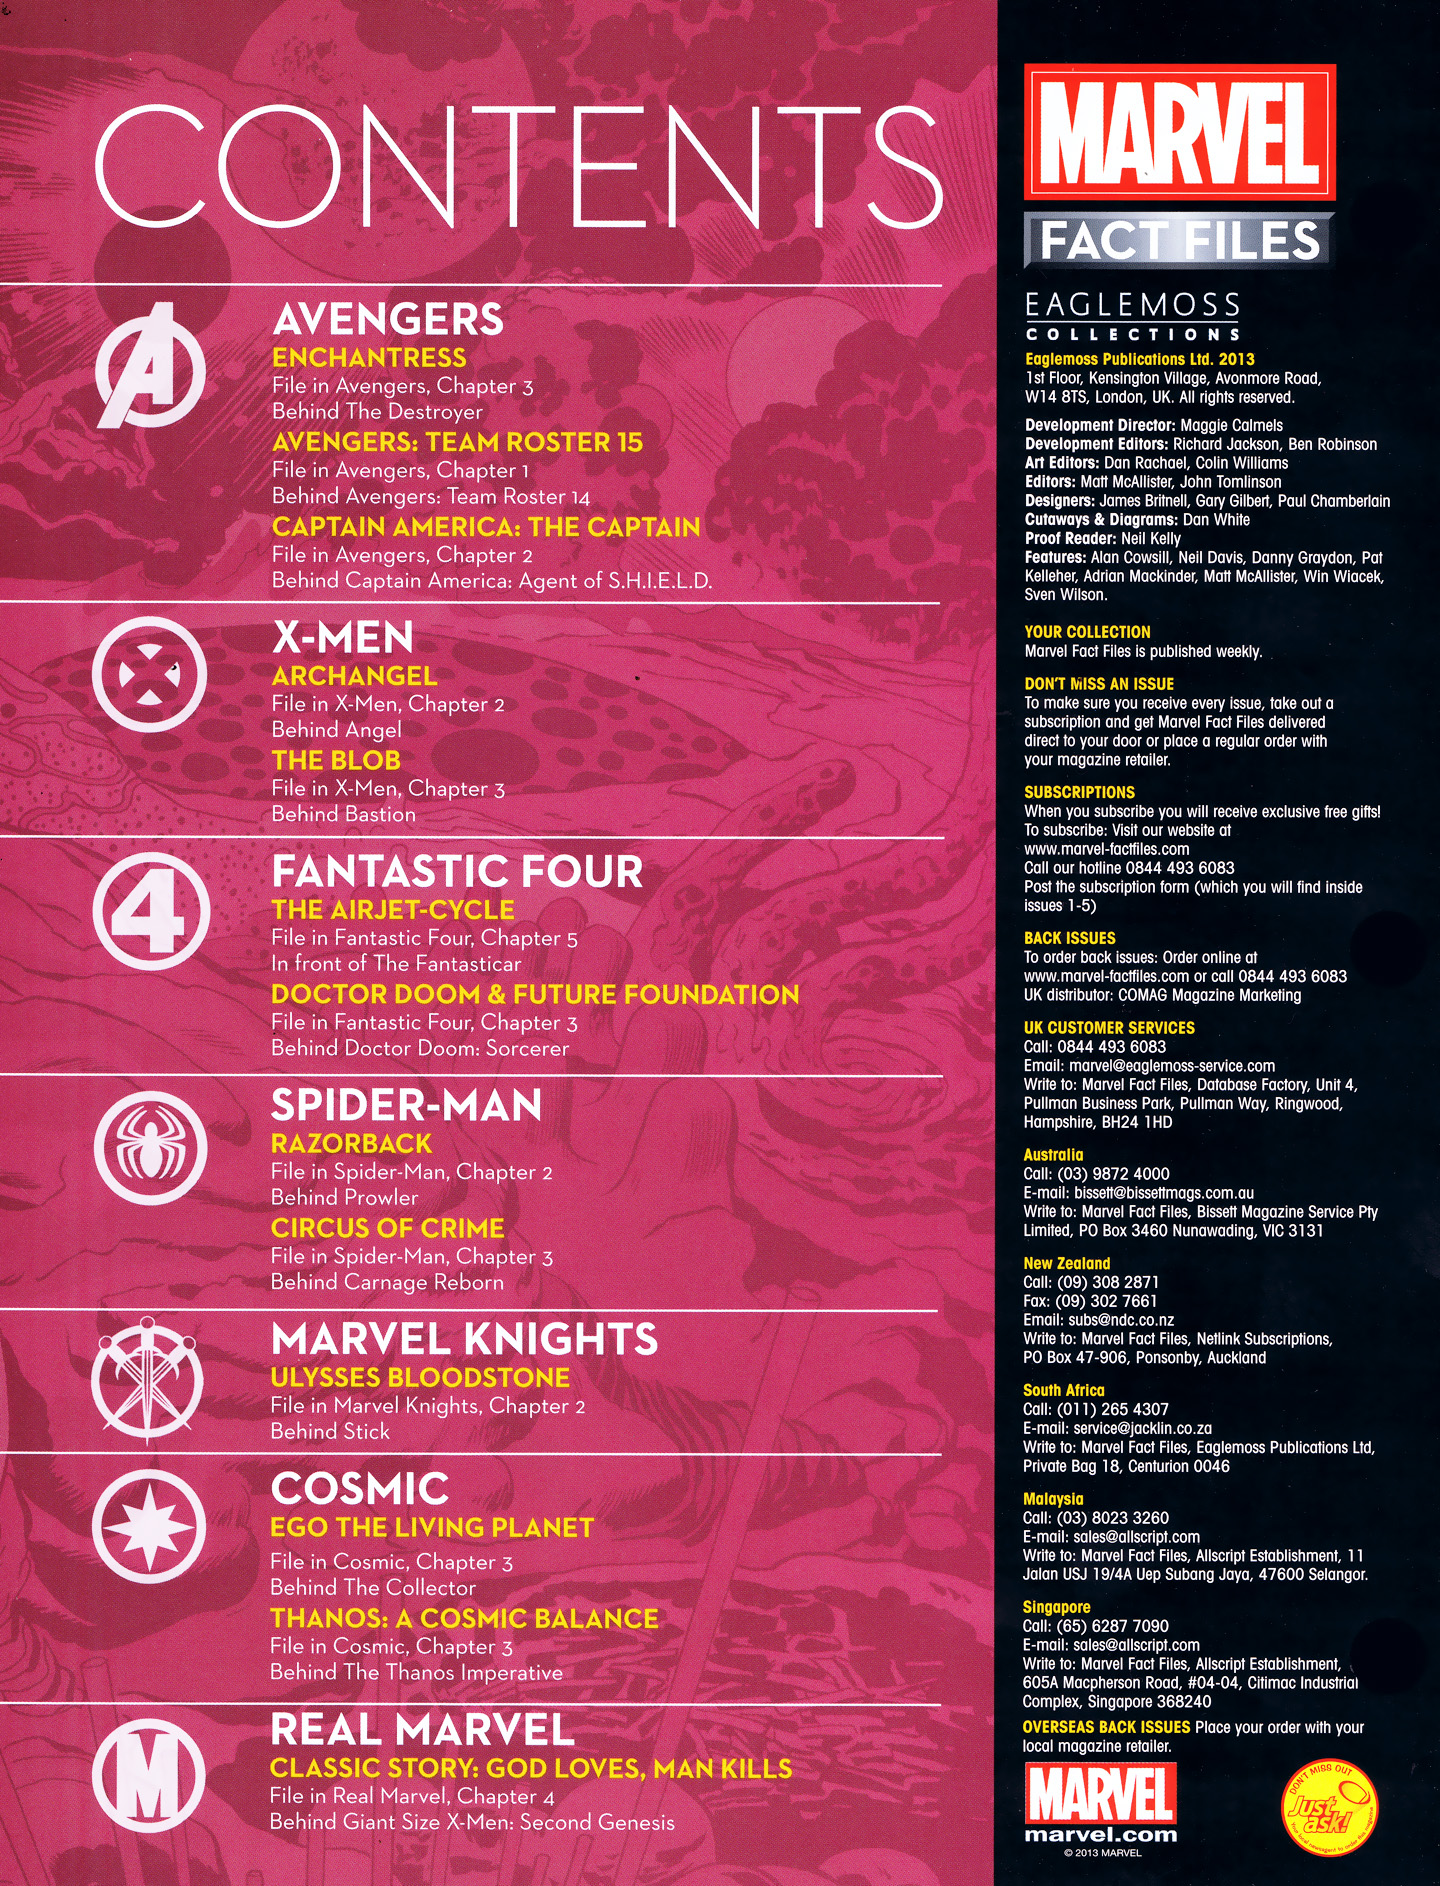 Read online Marvel Fact Files comic -  Issue #42 - 3